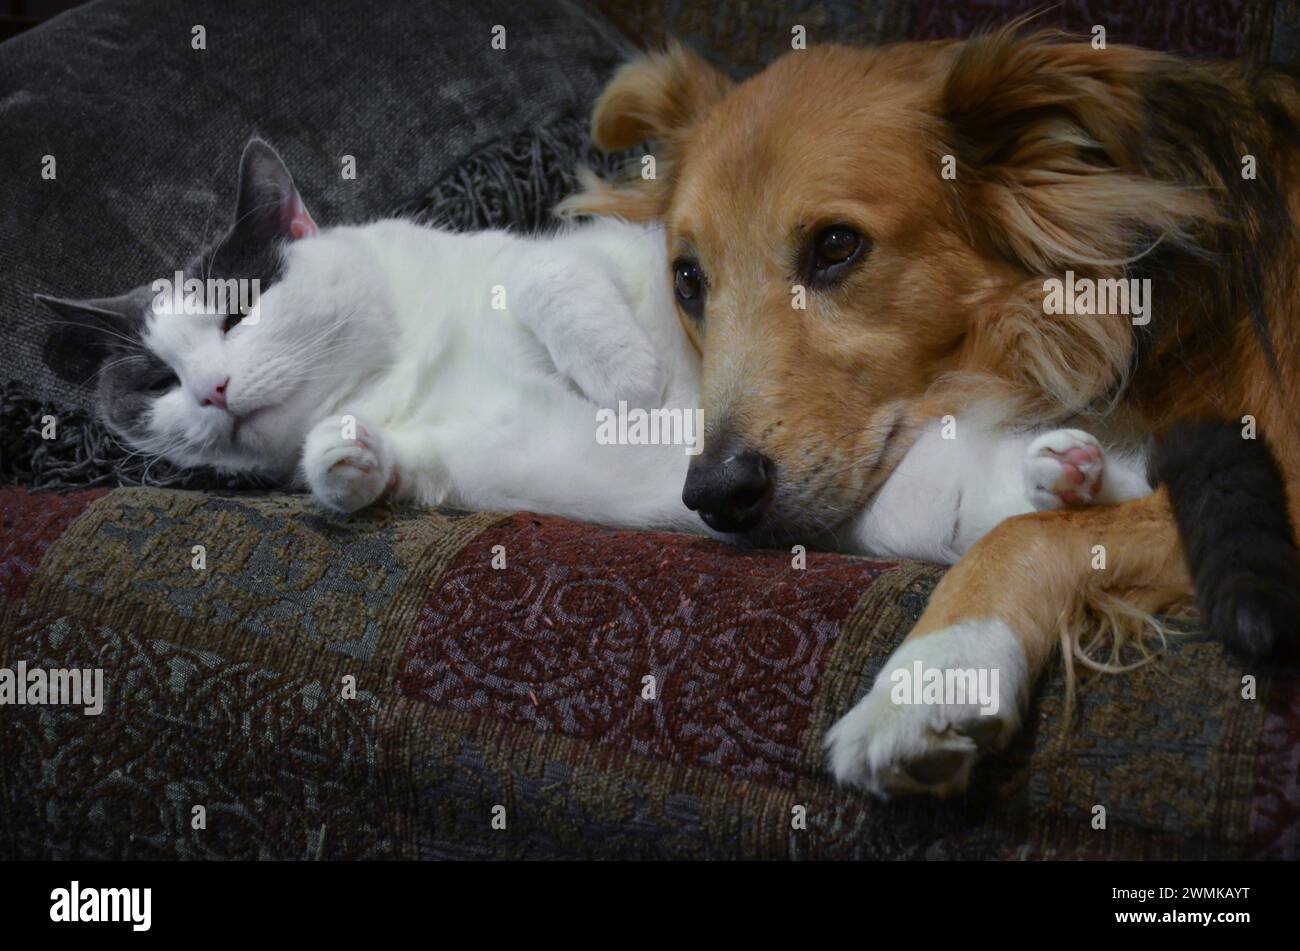 Cat and a dog snuggle Stock Photo